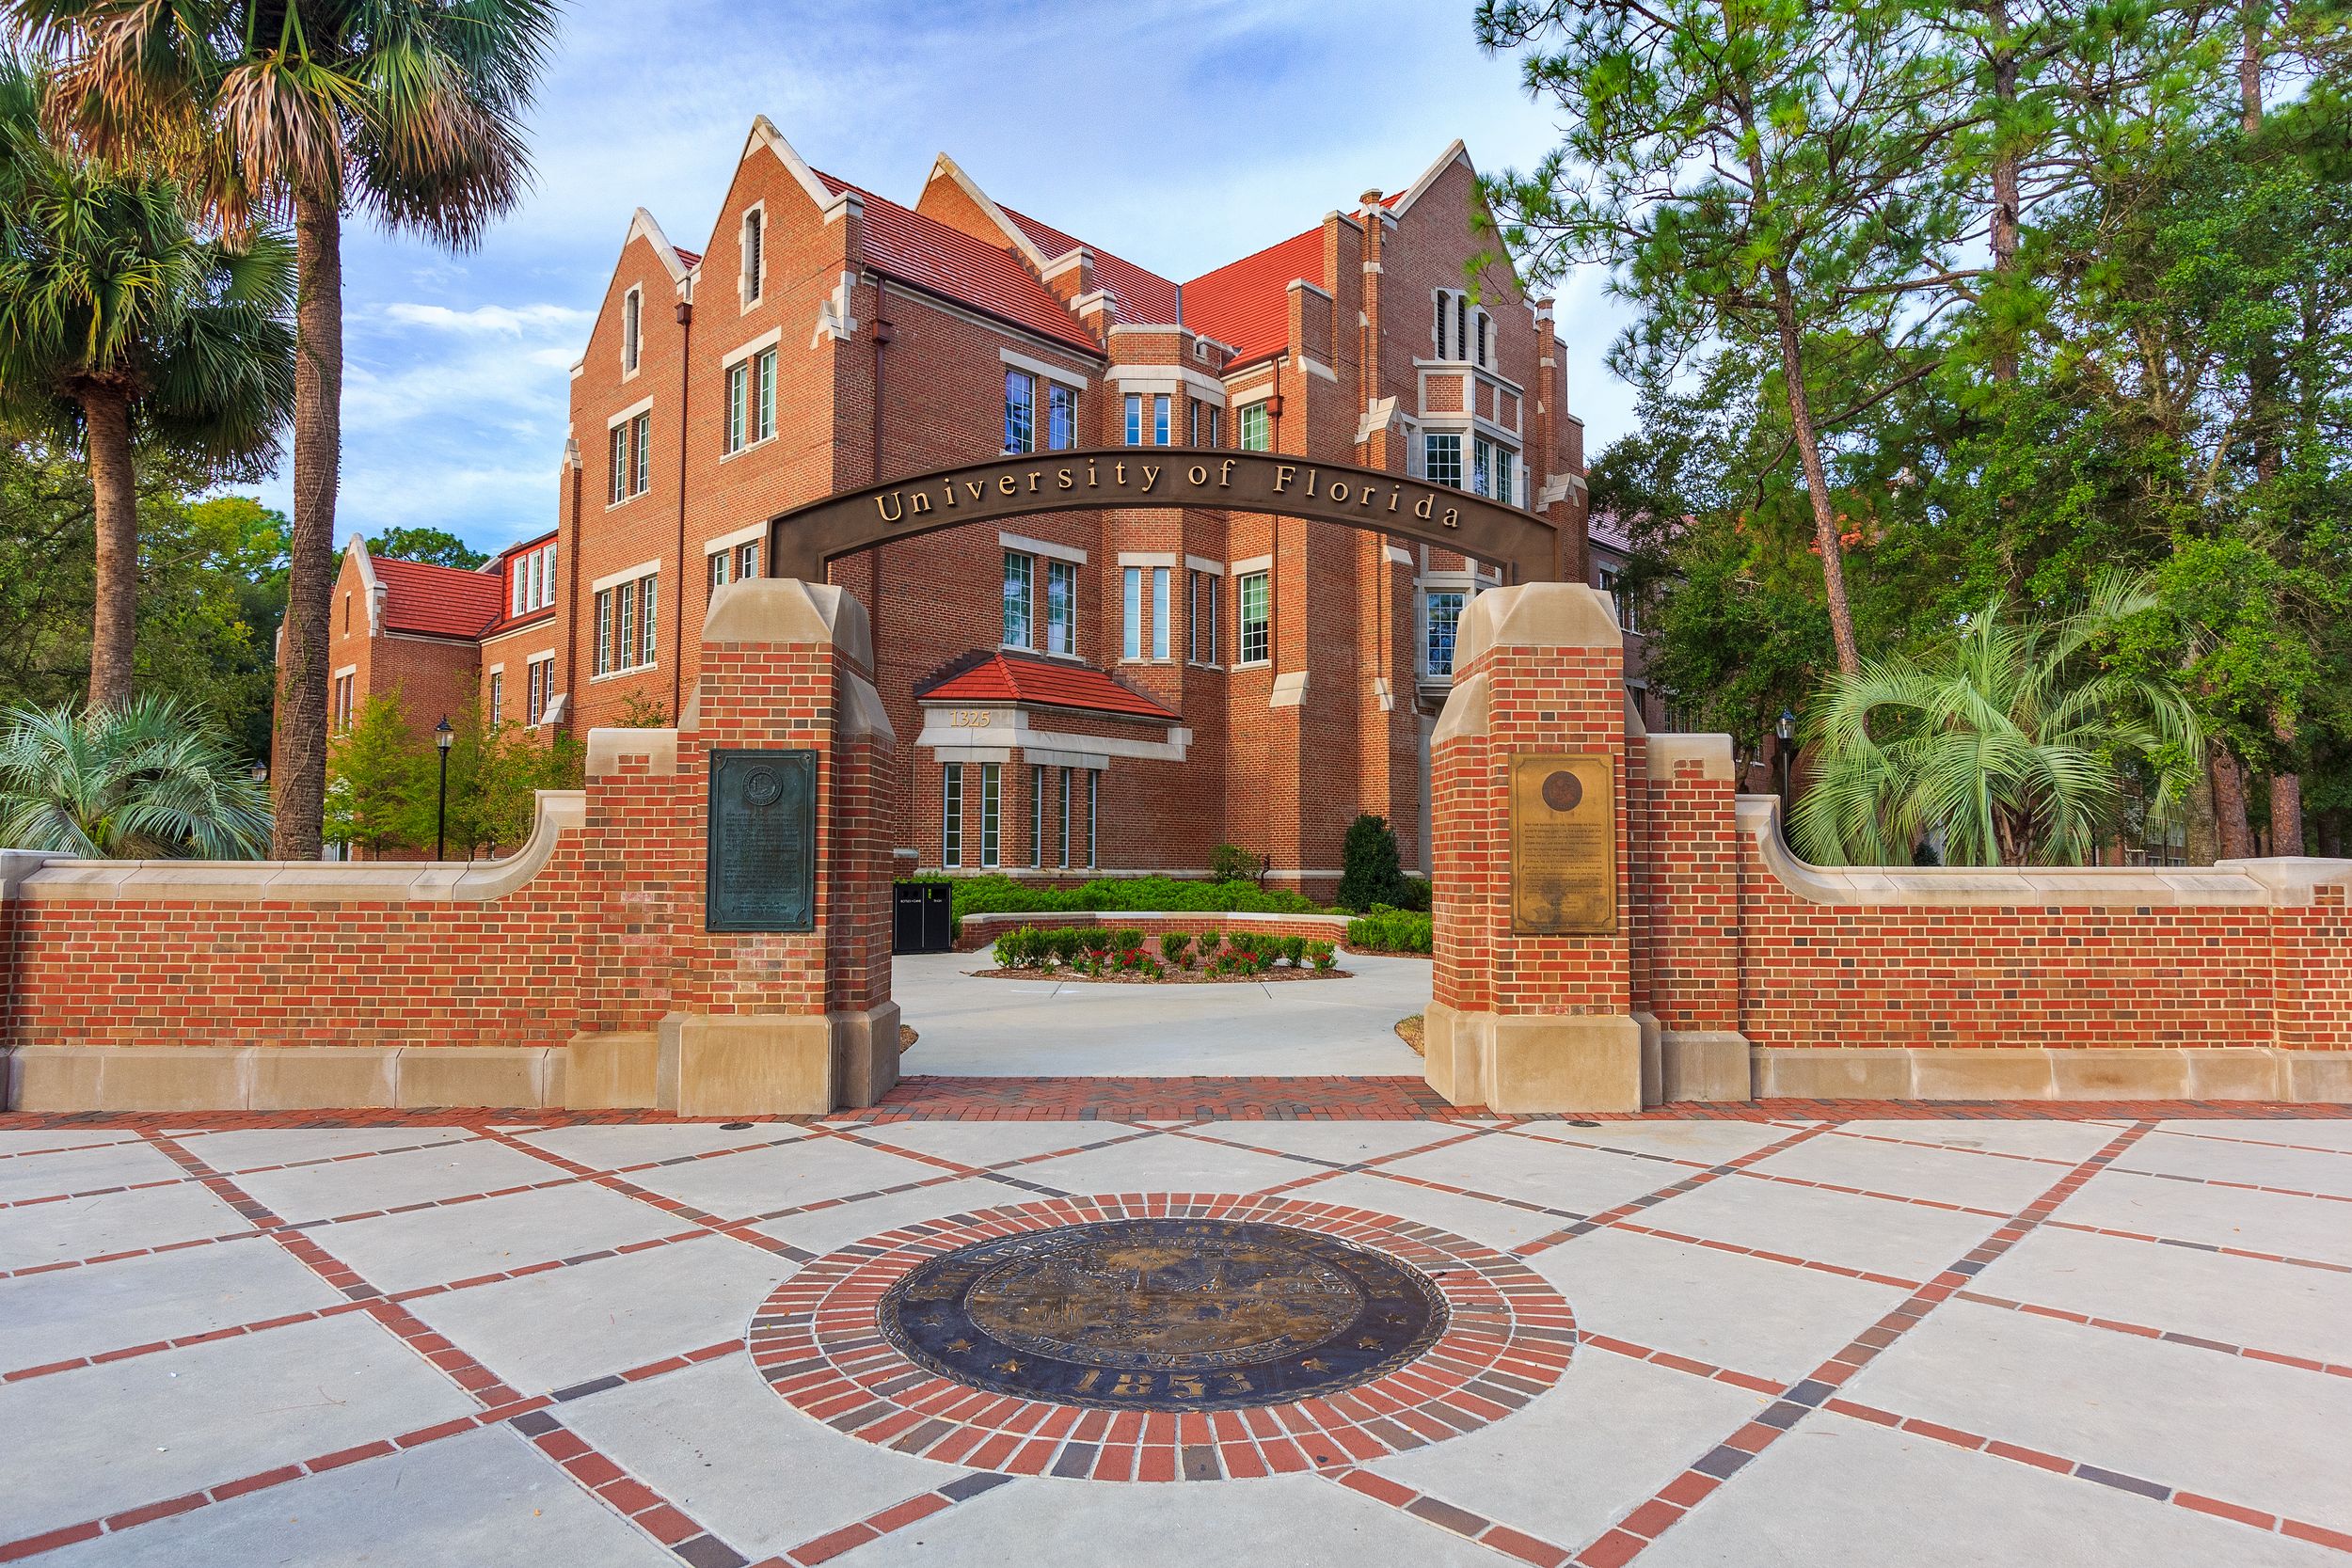 A building from the University of Florida with a sign for the school in the foreground.